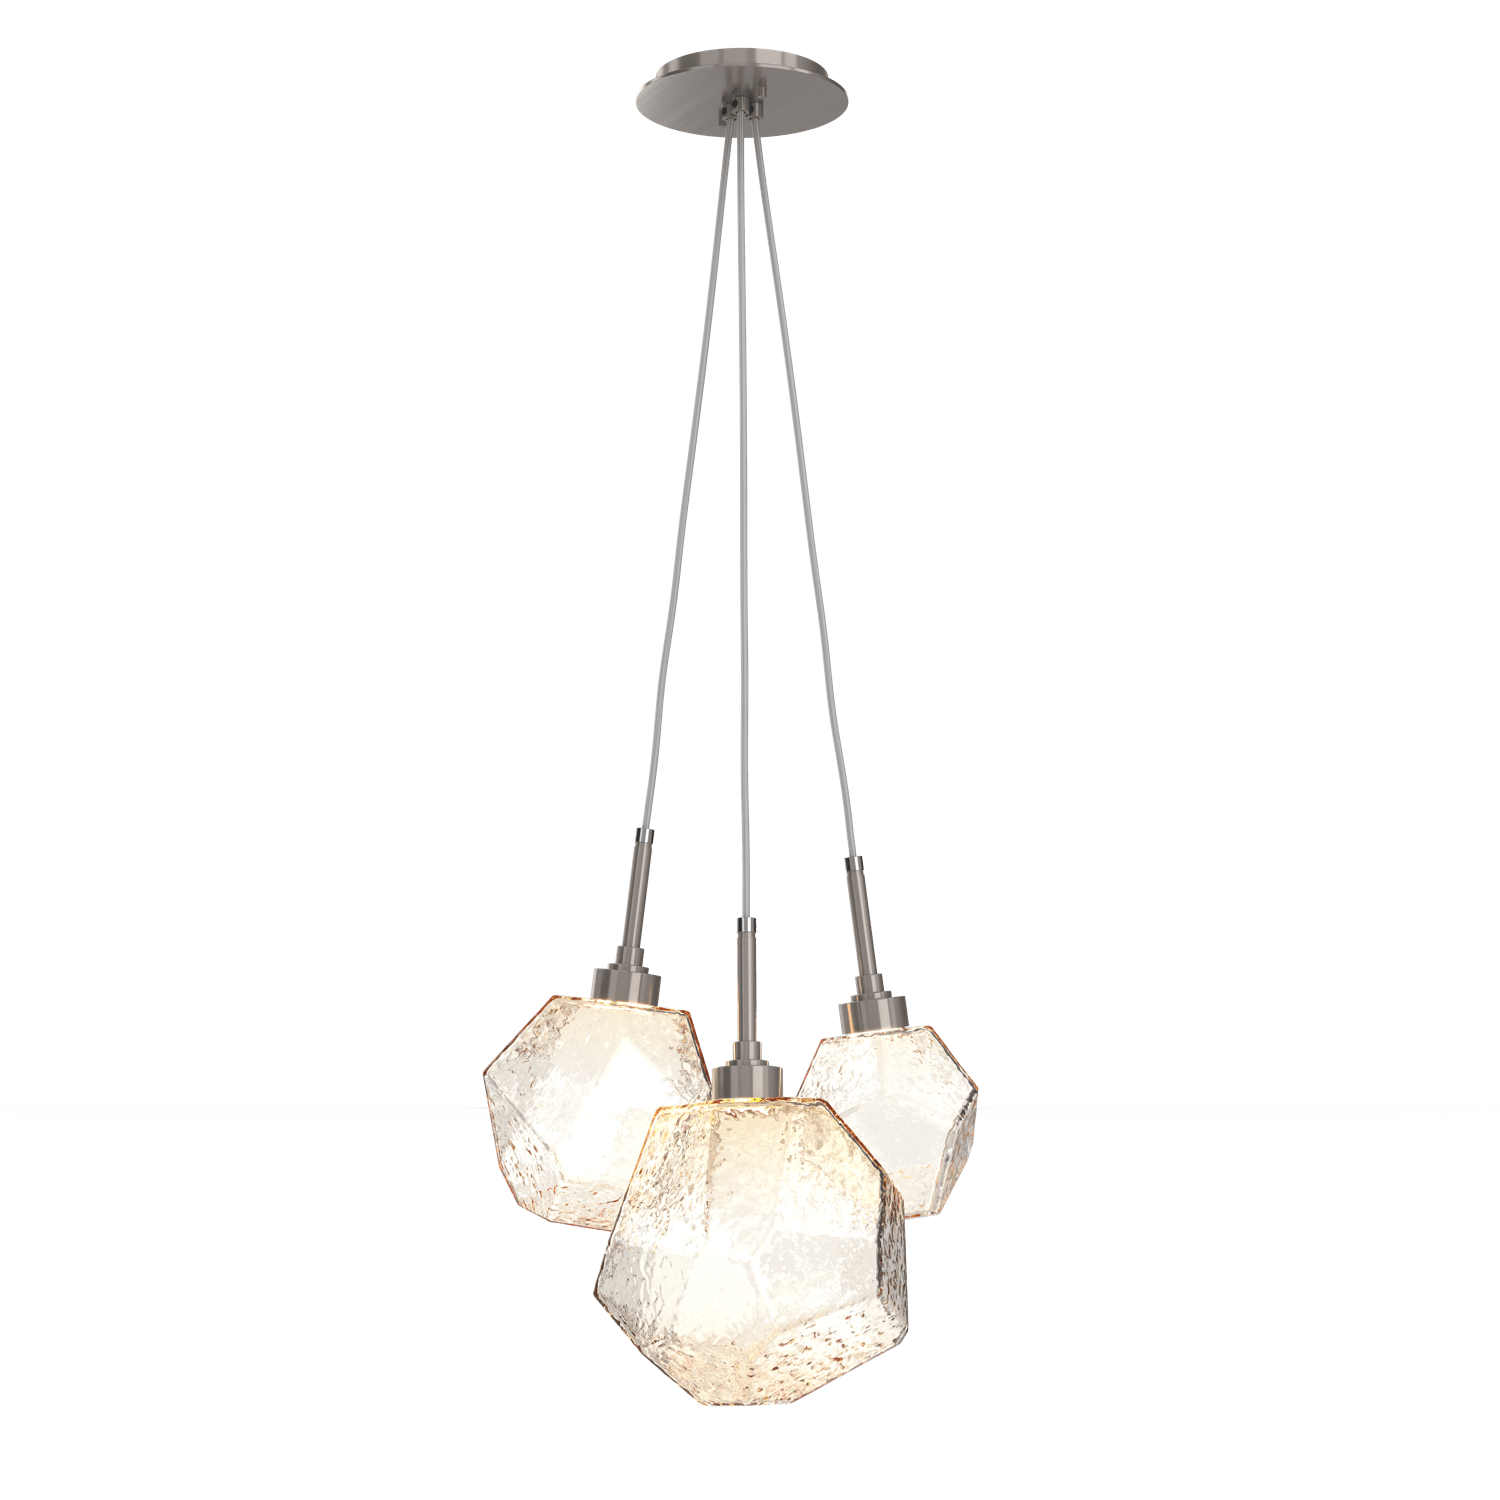 CHB0039-0E-GM-A-Hammerton-Studio-Gem-3-light-cluster-pendant-light-with-gunmetal-finish-and-amber-blown-glass-shades-and-LED-lamping